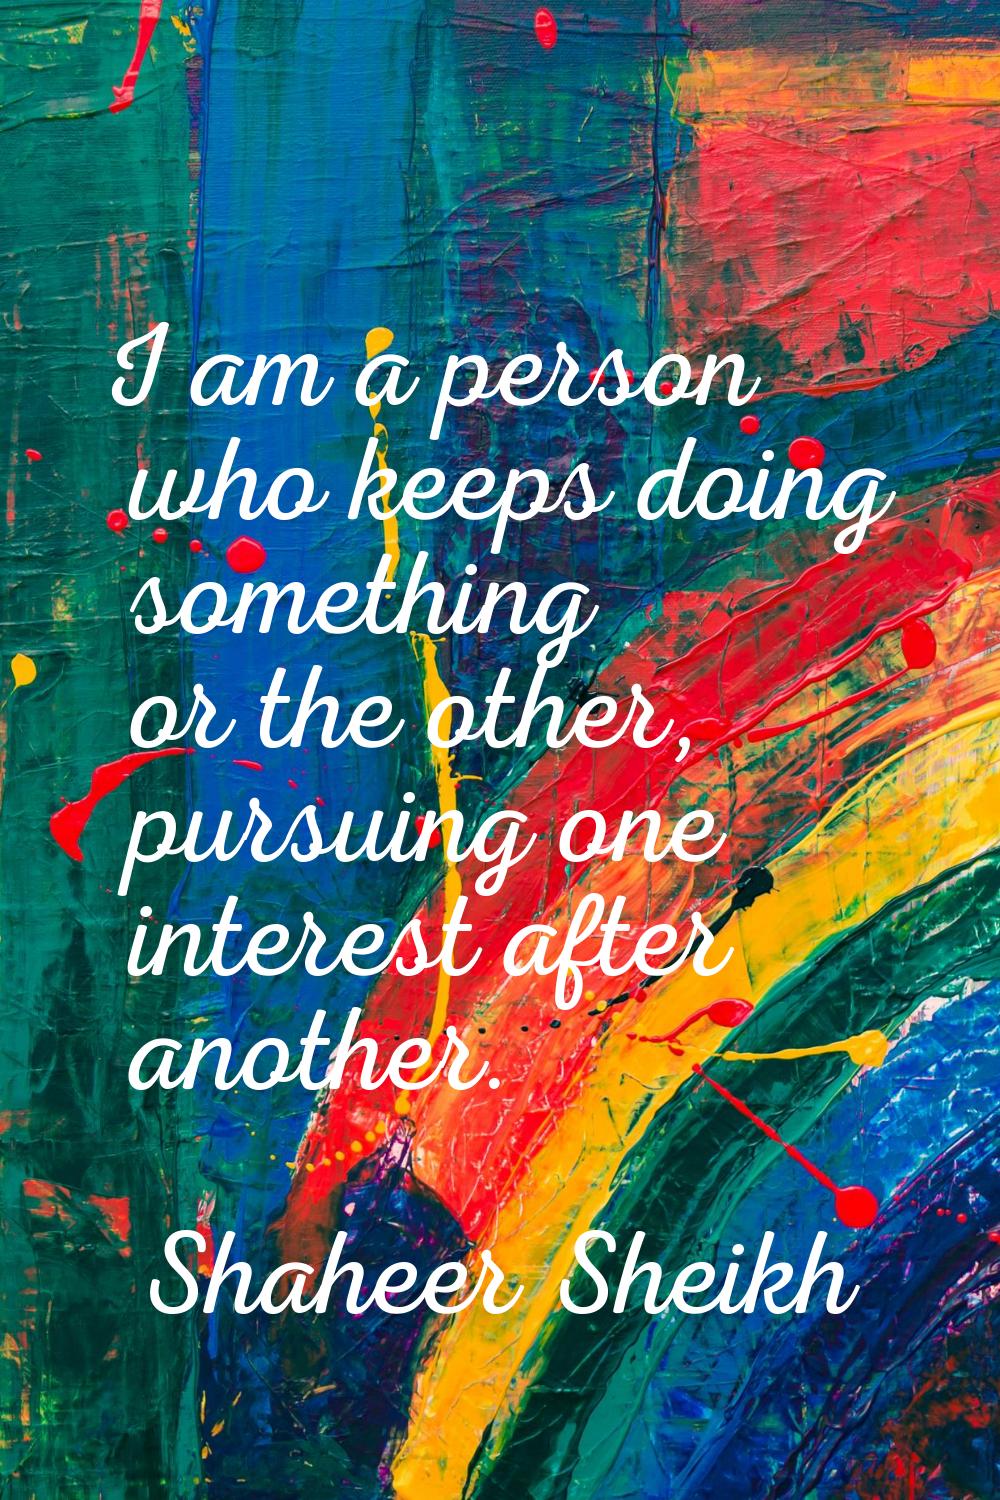 I am a person who keeps doing something or the other, pursuing one interest after another.